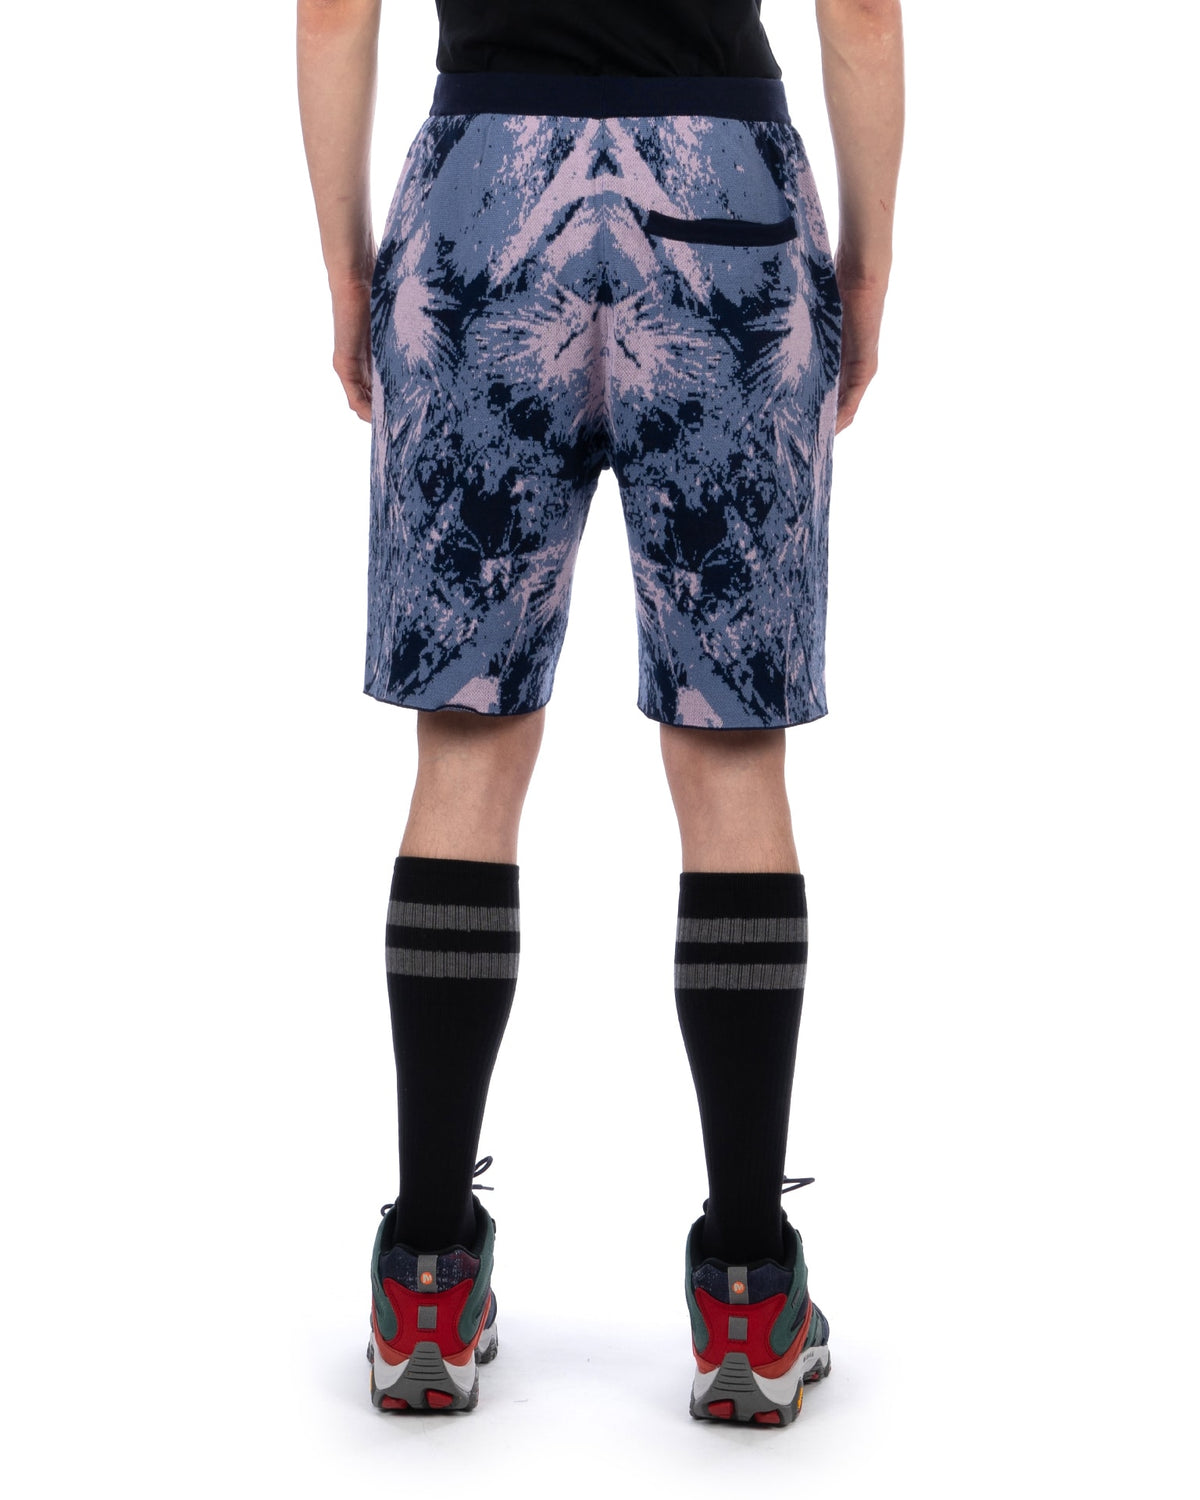 White Mountaineering | Jungle Pattern Knit Shorts Navy / Pink - Concrete